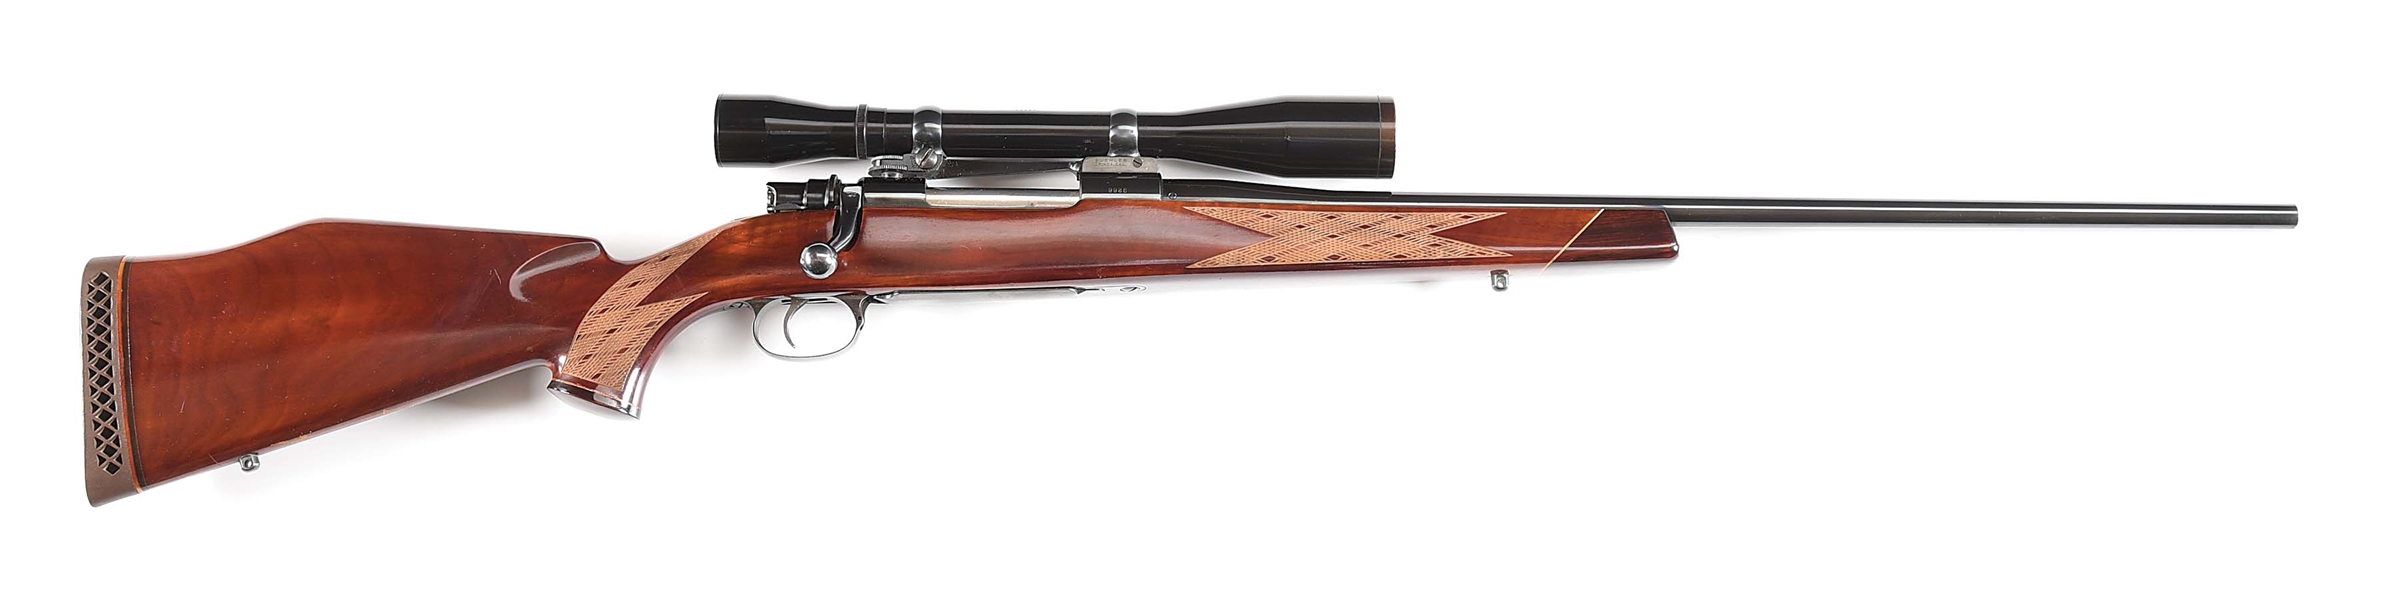 (M) WEATHERBY SOUTH GATE BOLT ACTION RIFLE .257 WEATHERBY MAGNUM.